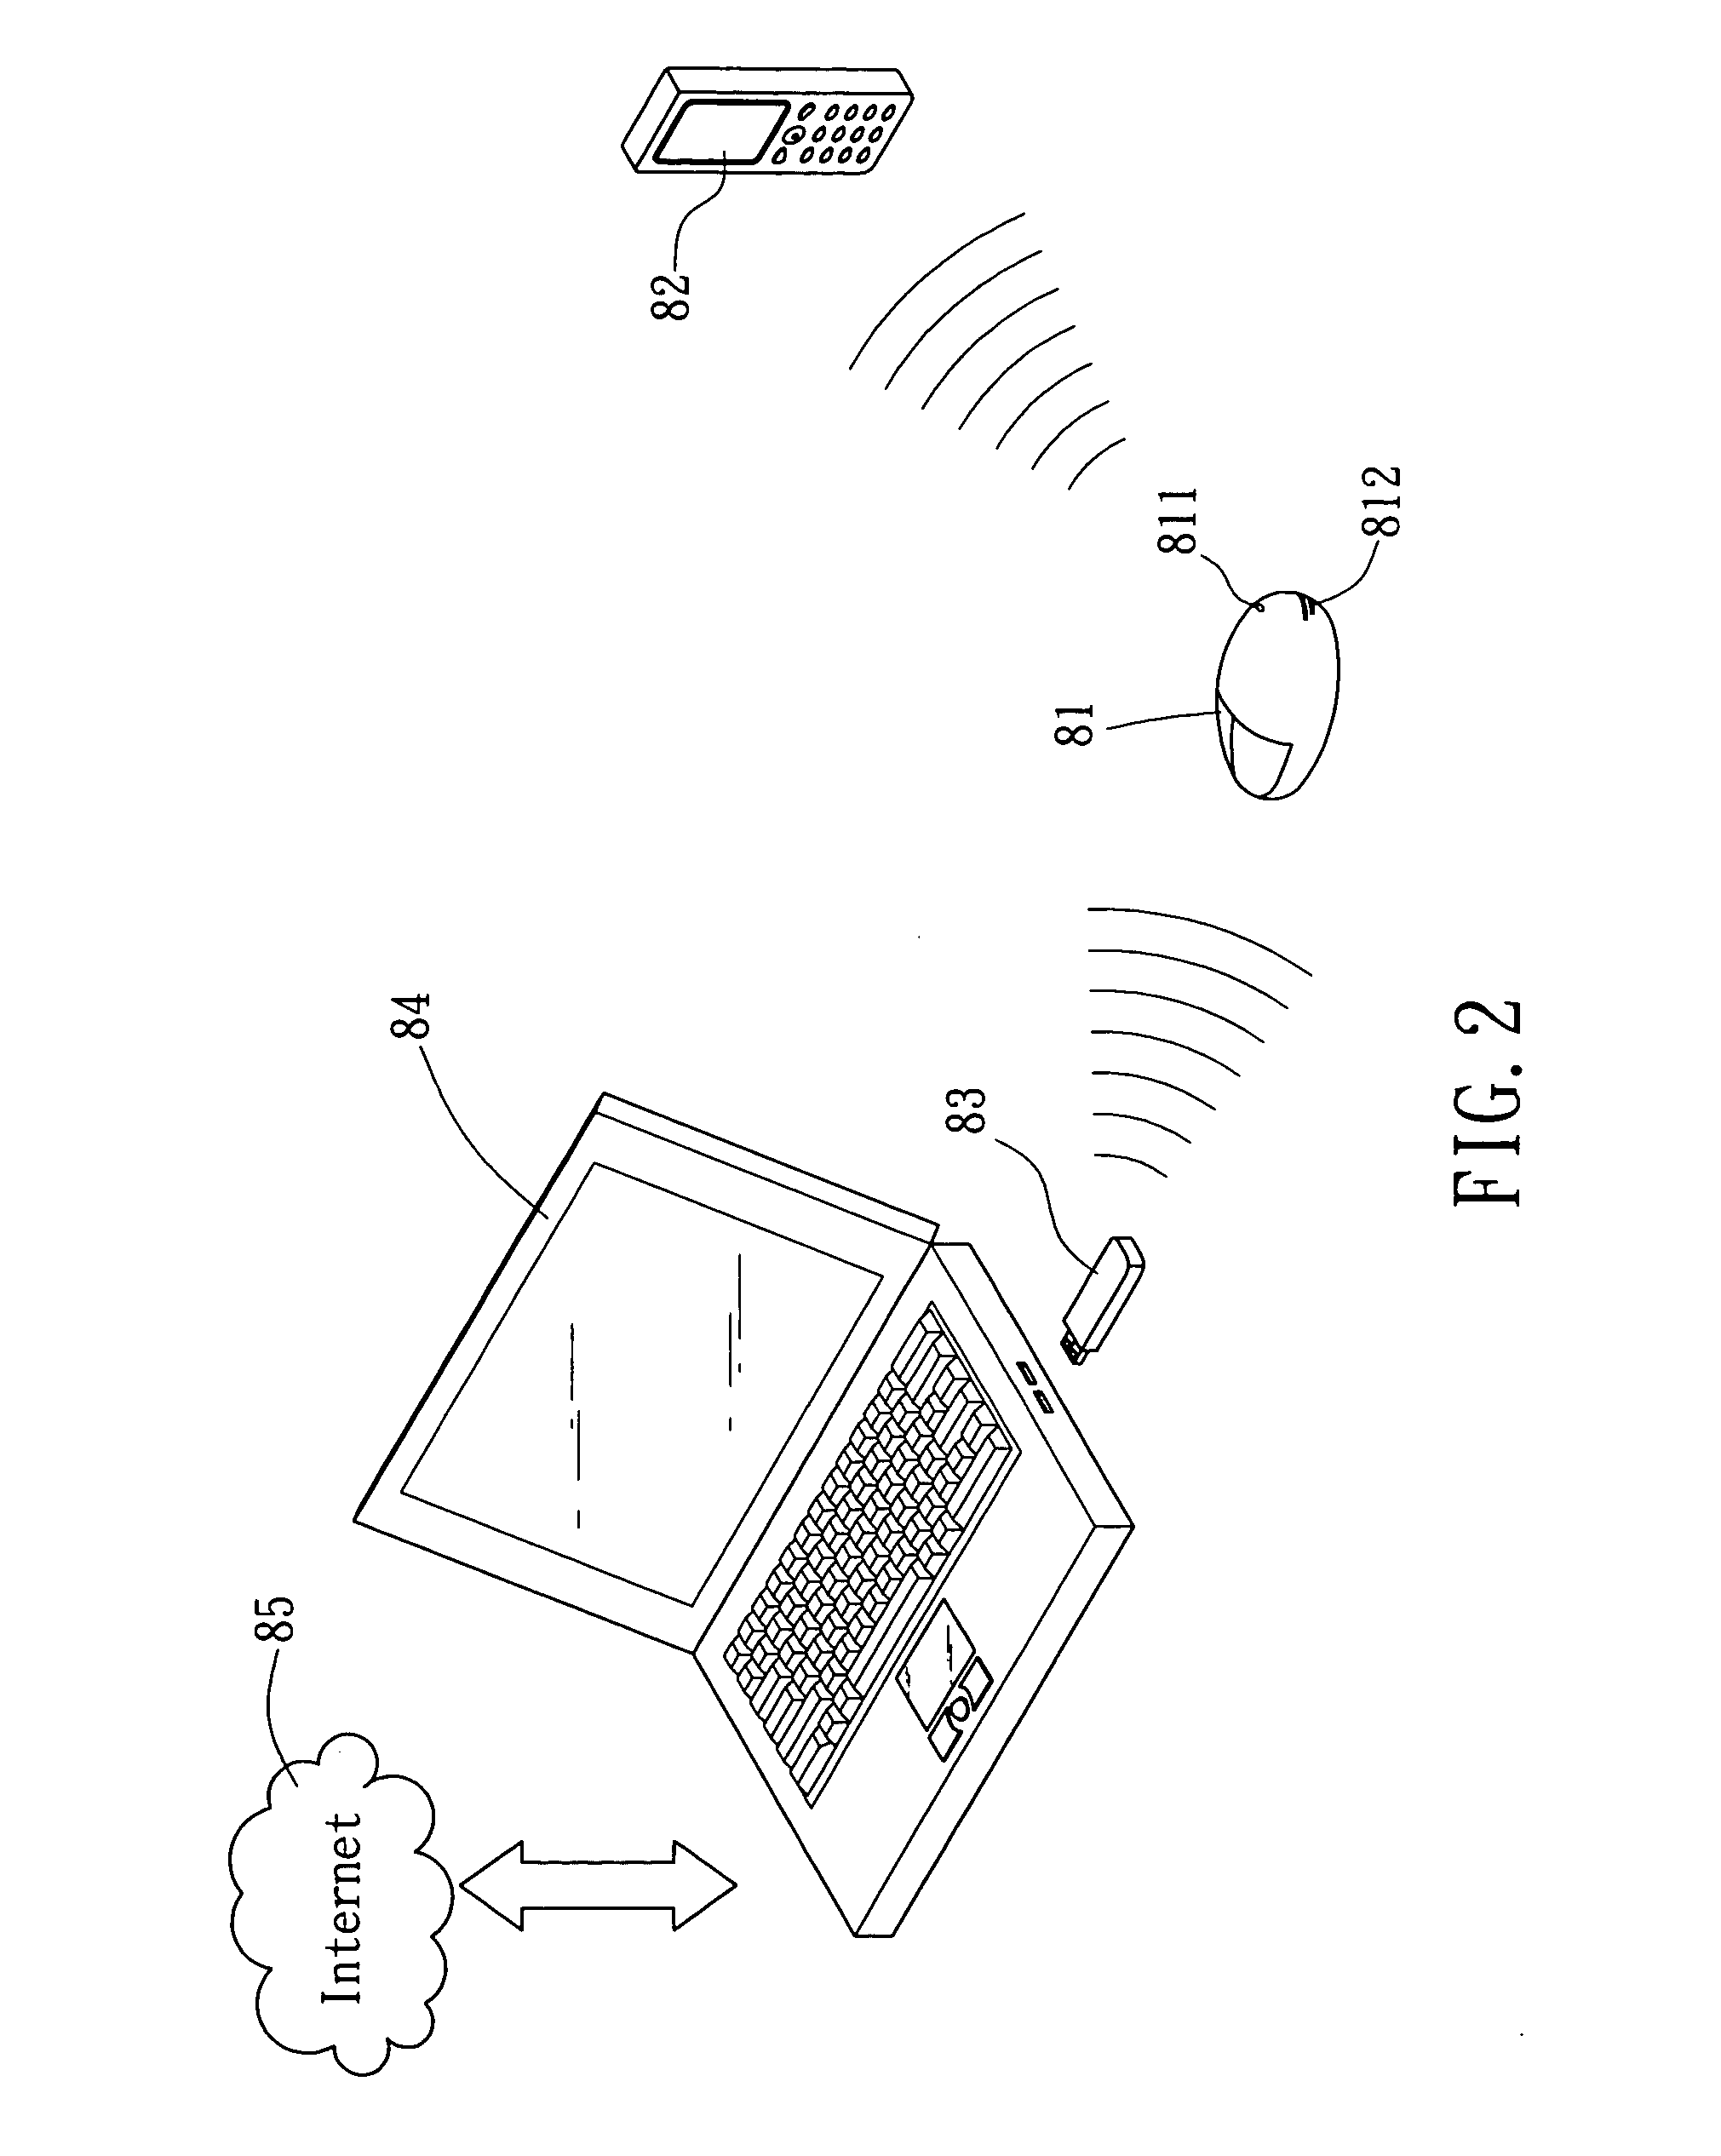 Computer input device with bluetooth hand-free handset